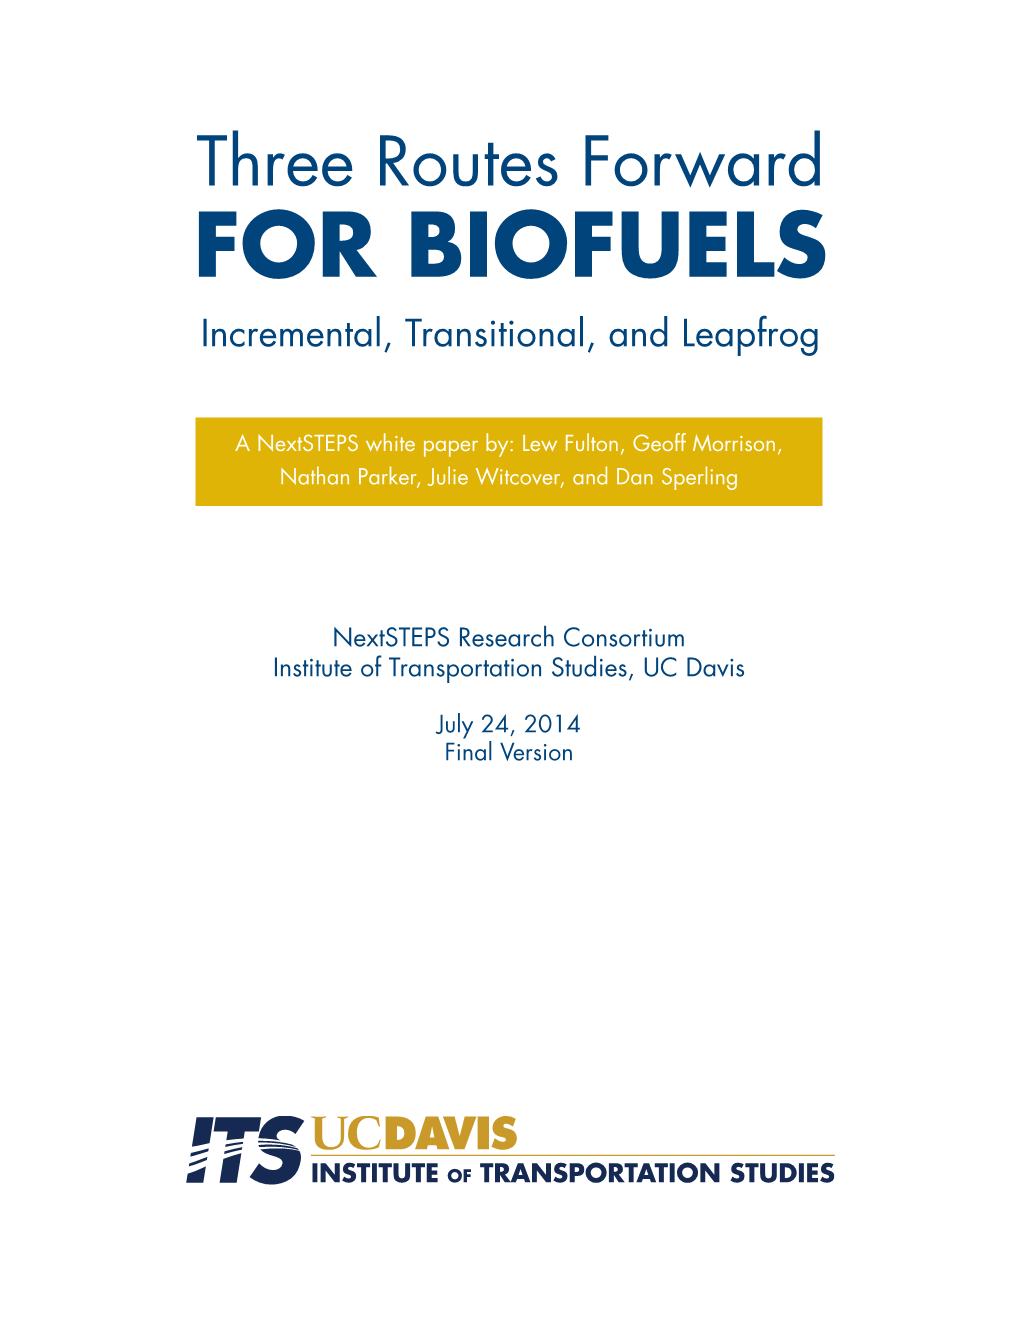 Three Routes Forward for BIOFUELS Incremental, Transitional, and Leapfrog